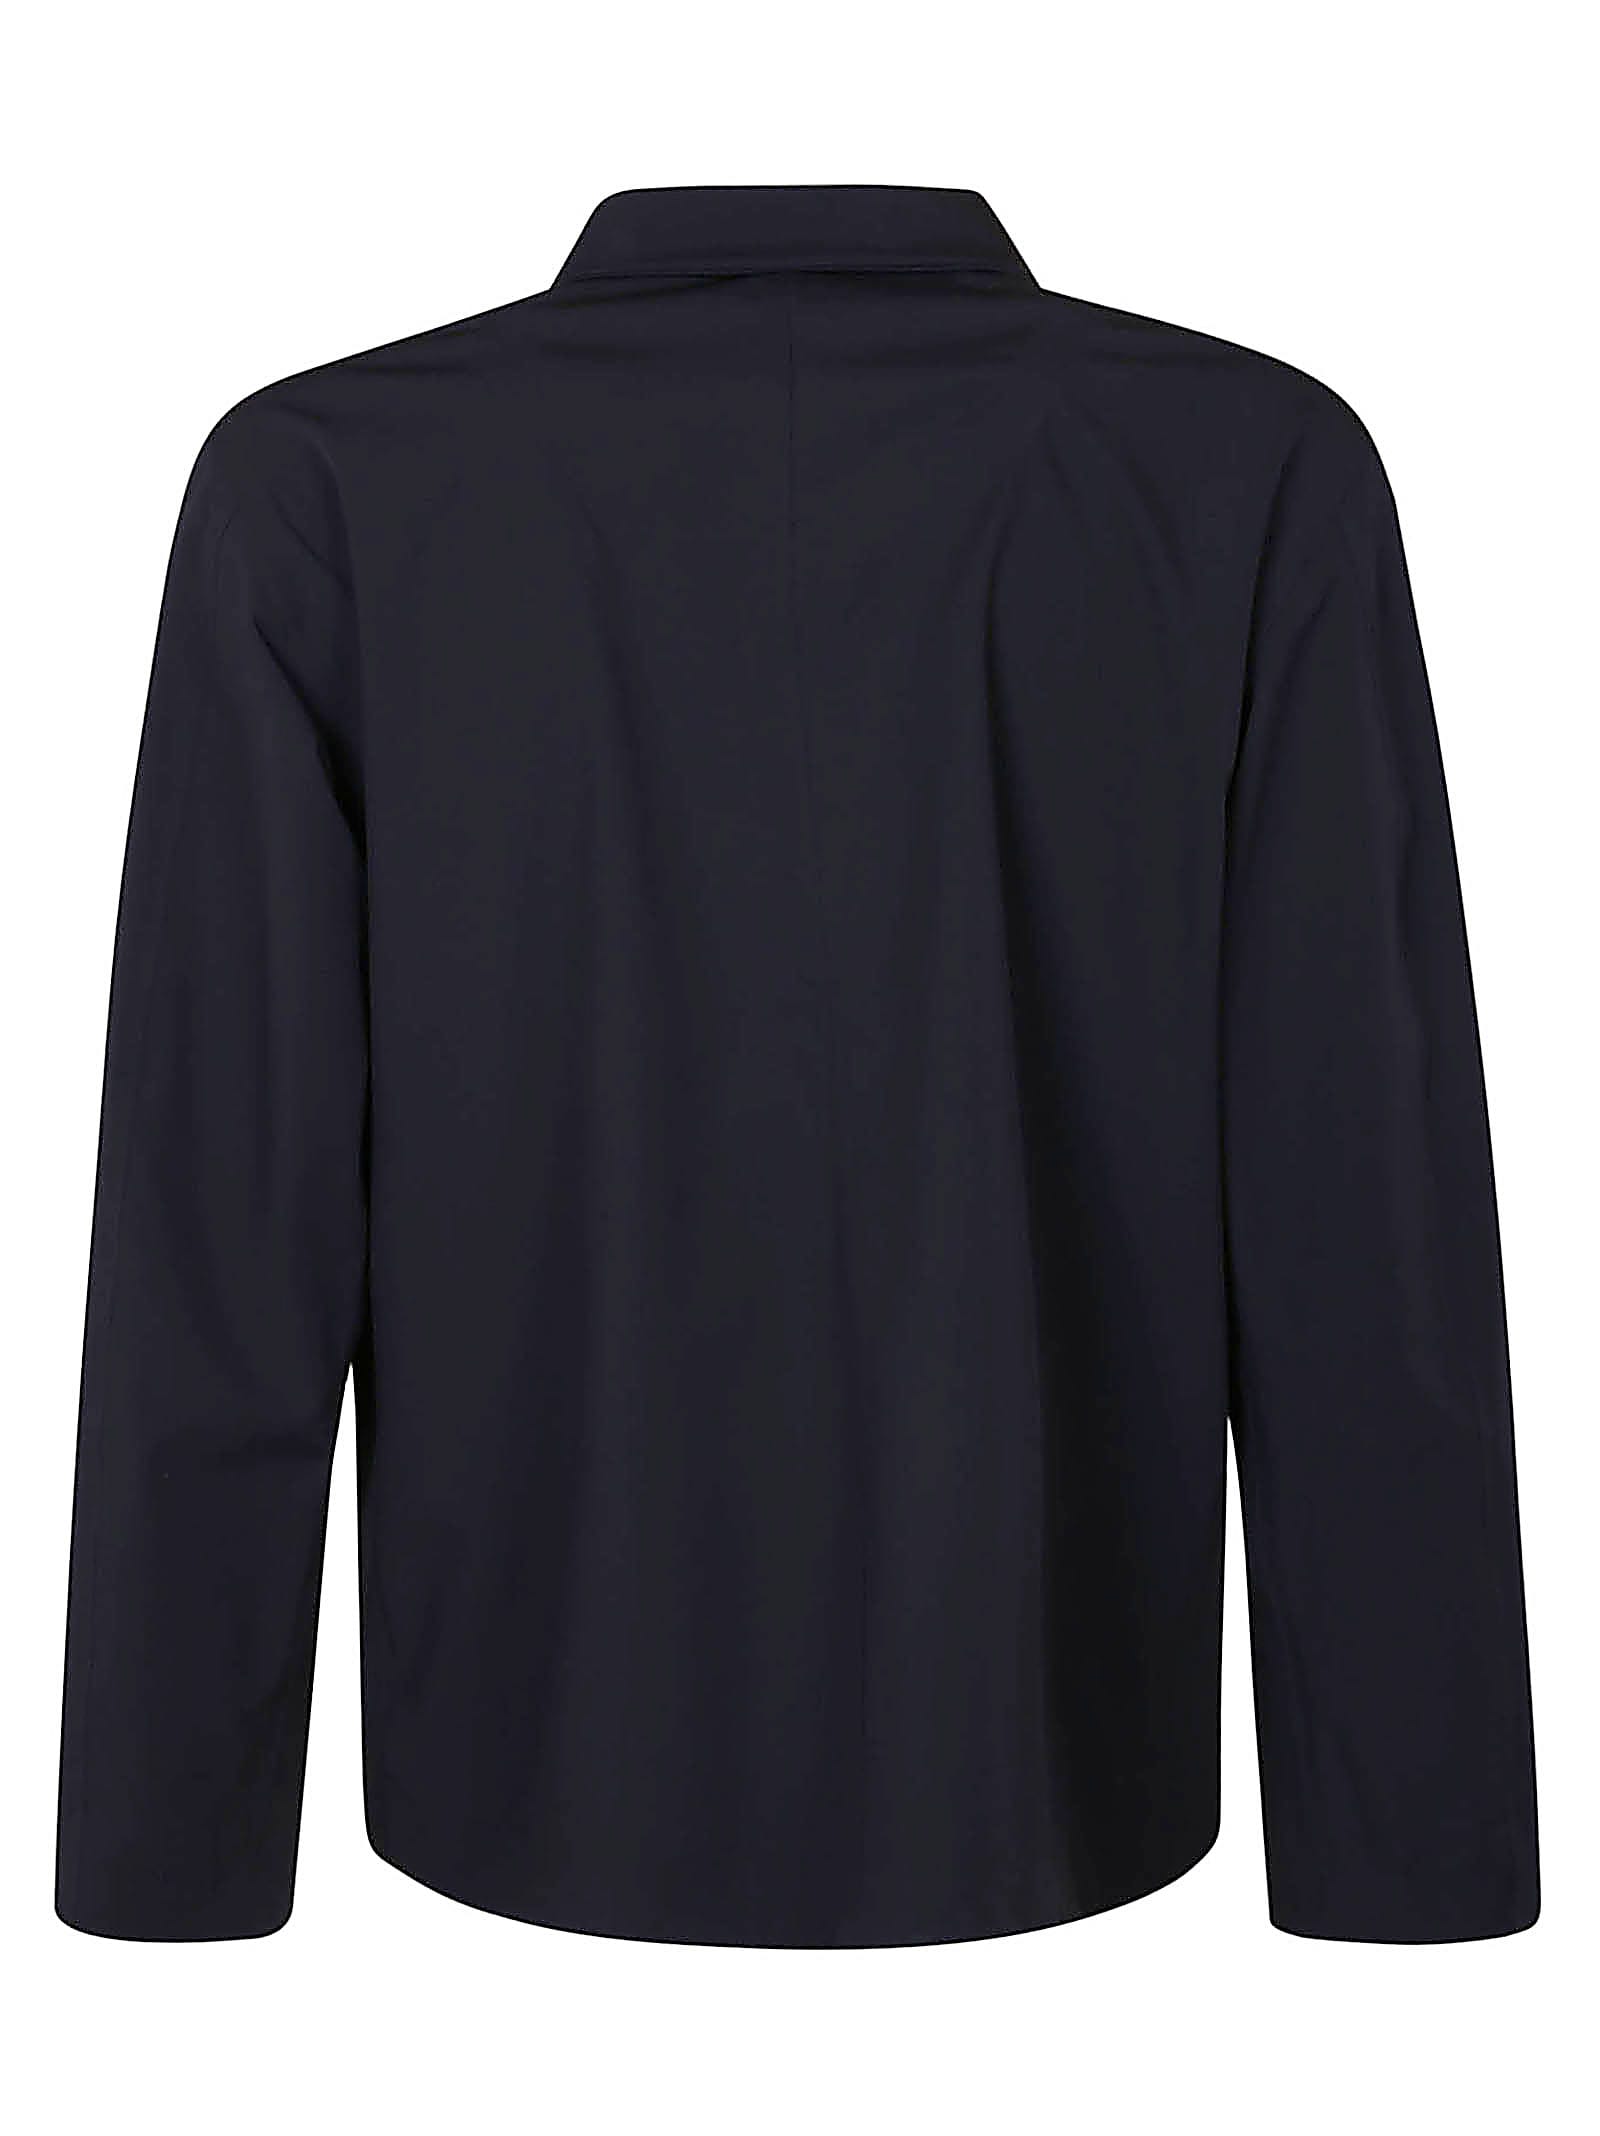 Shop Herno Classic Side Pockets Buttoned Jacket In Blue Navy